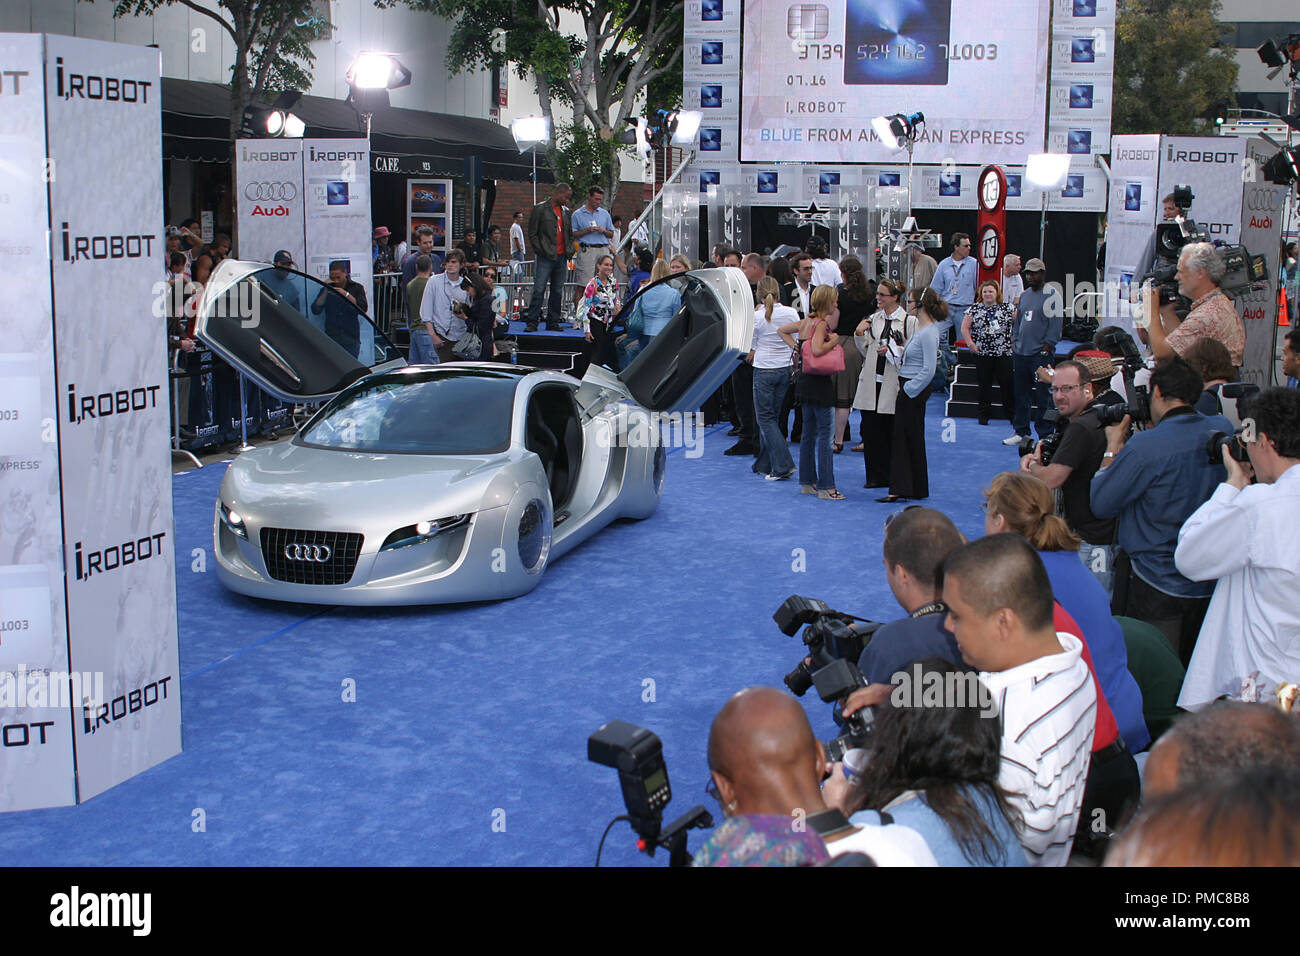 'I, Robot' Premiere  7-7-2004 'I, Robot' Car by Audi Photo by Joseph Martinez / PictureLux  File Reference # 21872 0005PLX  For Editorial Use Only -  All Rights Reserved Stock Photo